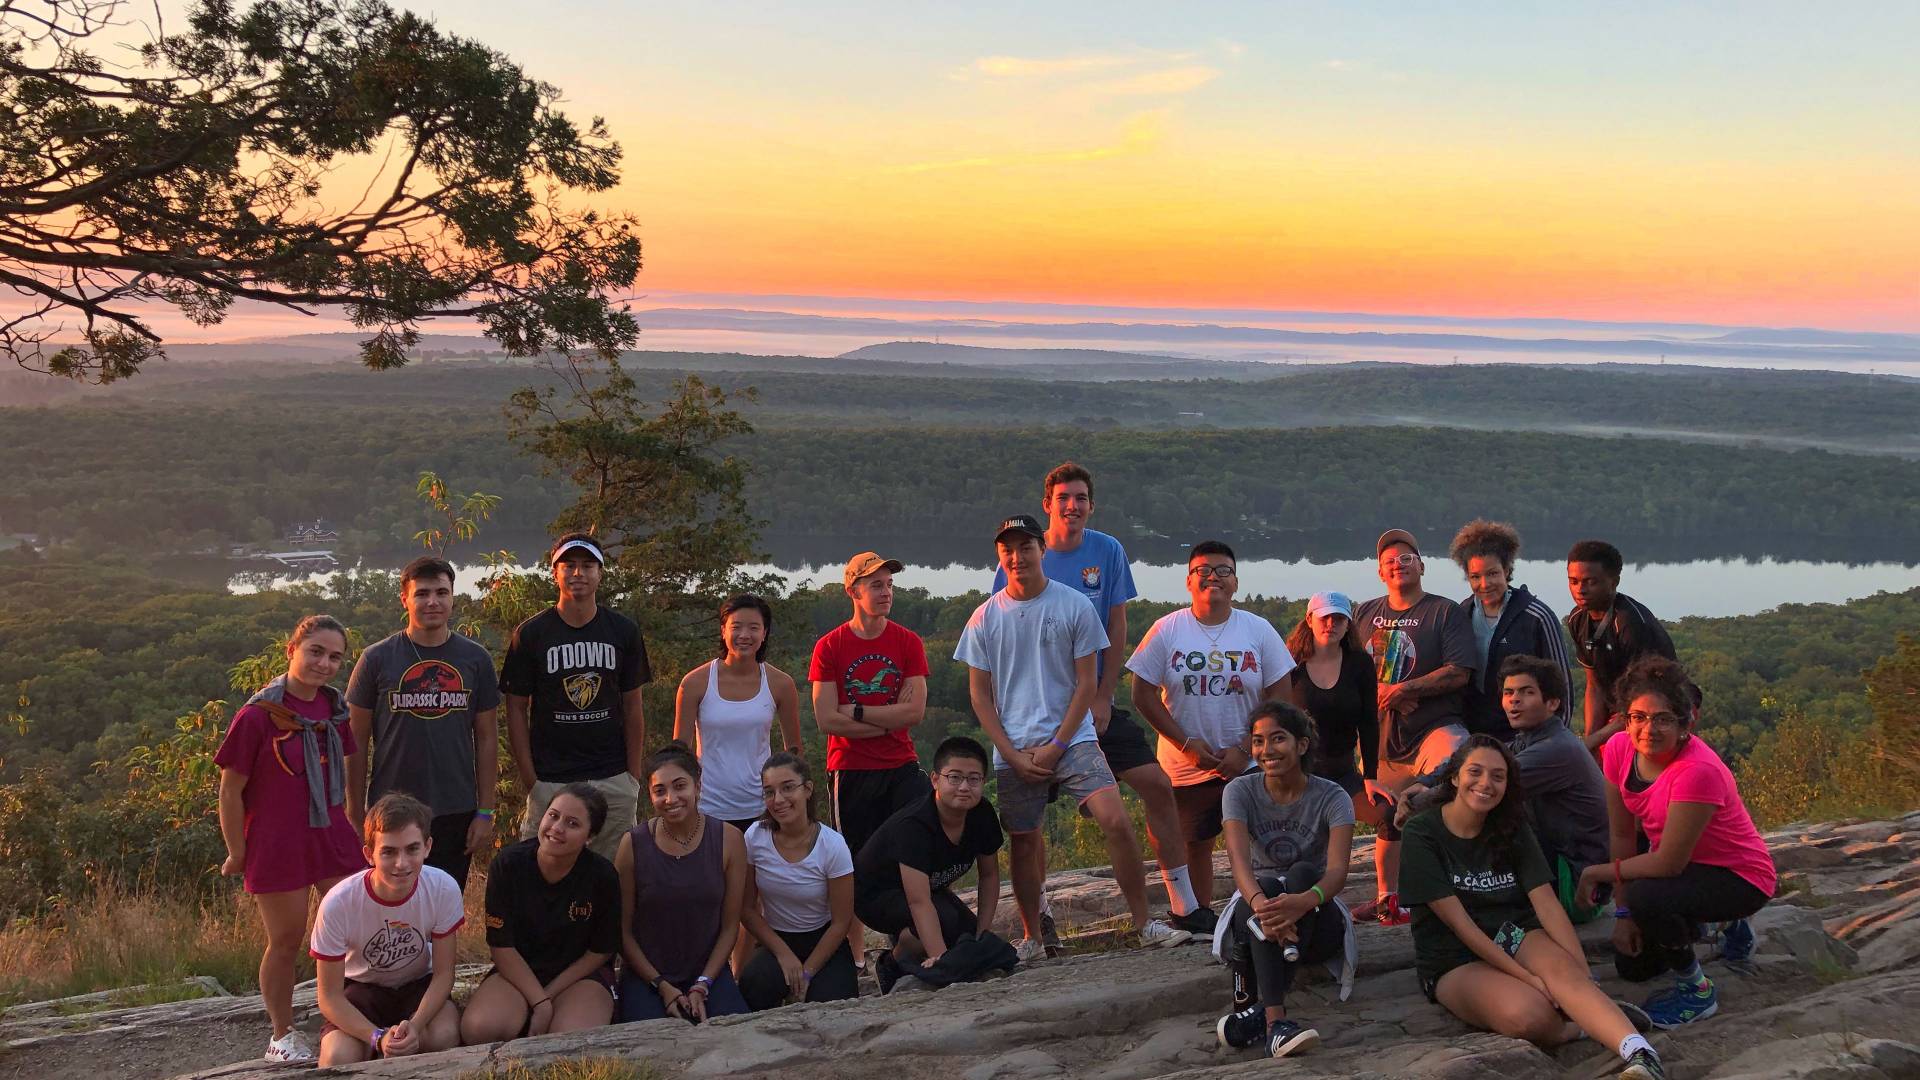 Students posing after a sunrise hike